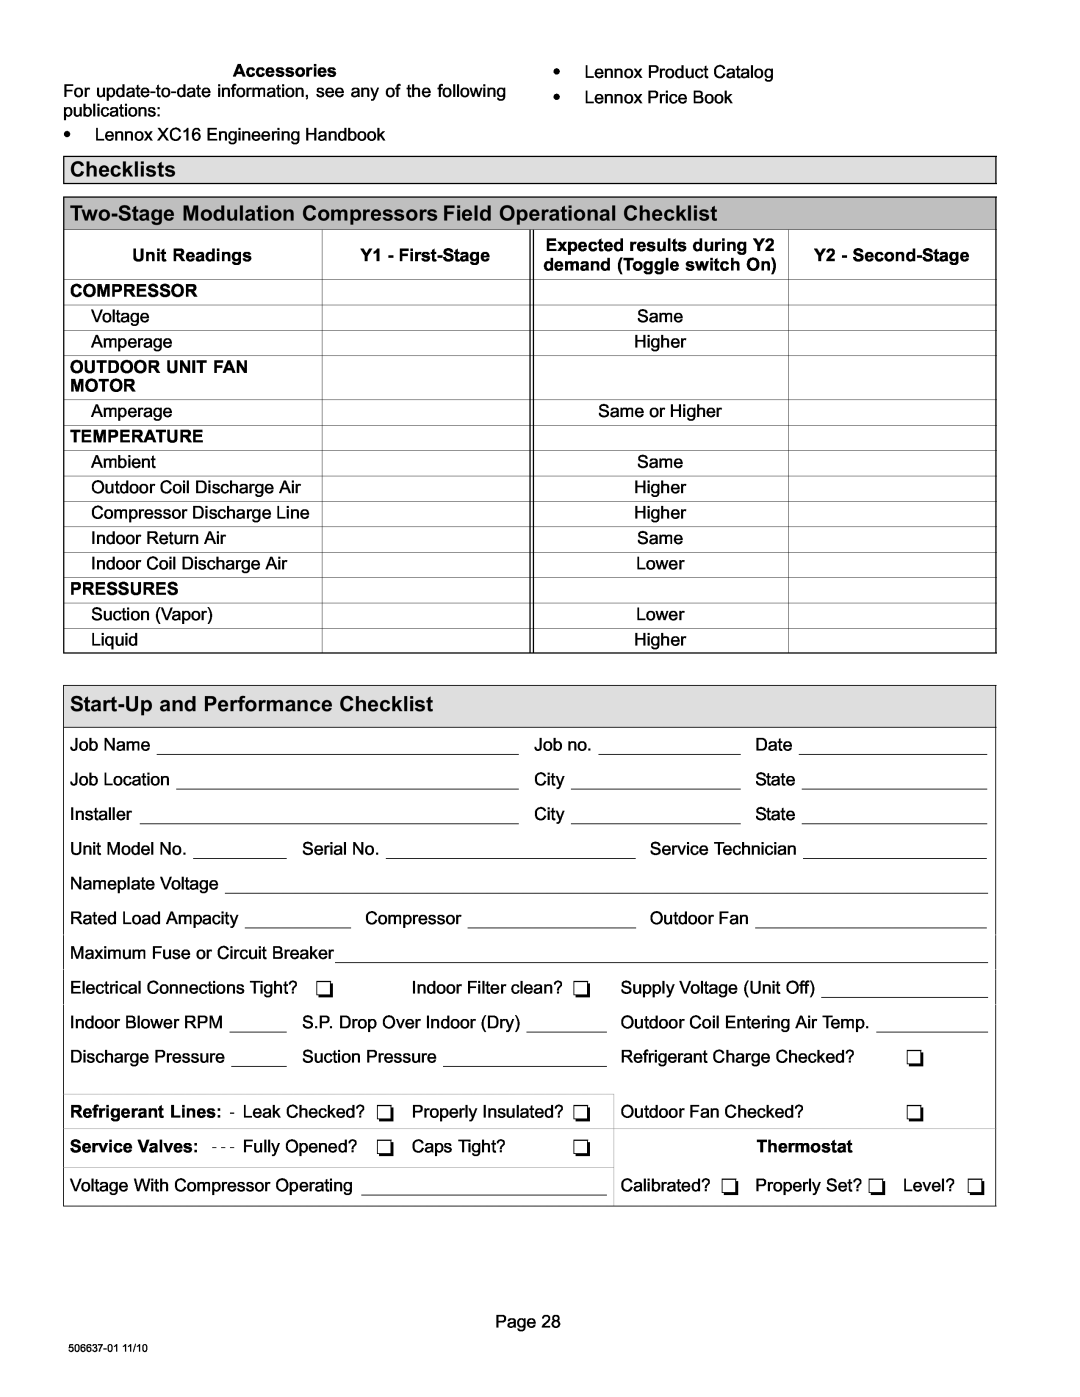 Lenox 506637-01, Elite Series X16 Air Conditioner Units Checklists, Start−Up and Performance Checklist 